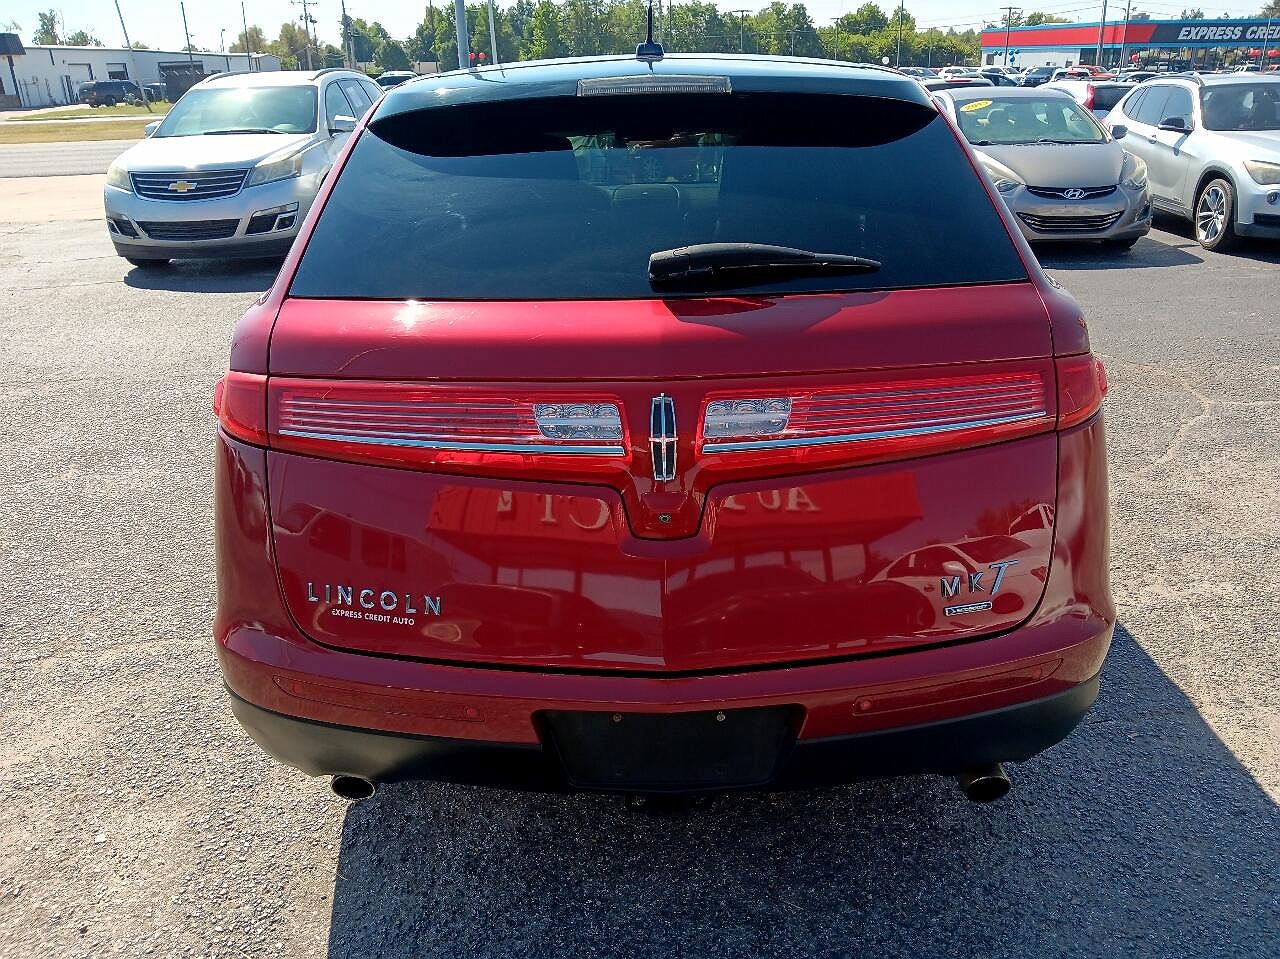 2013 Lincoln MKT null image 4